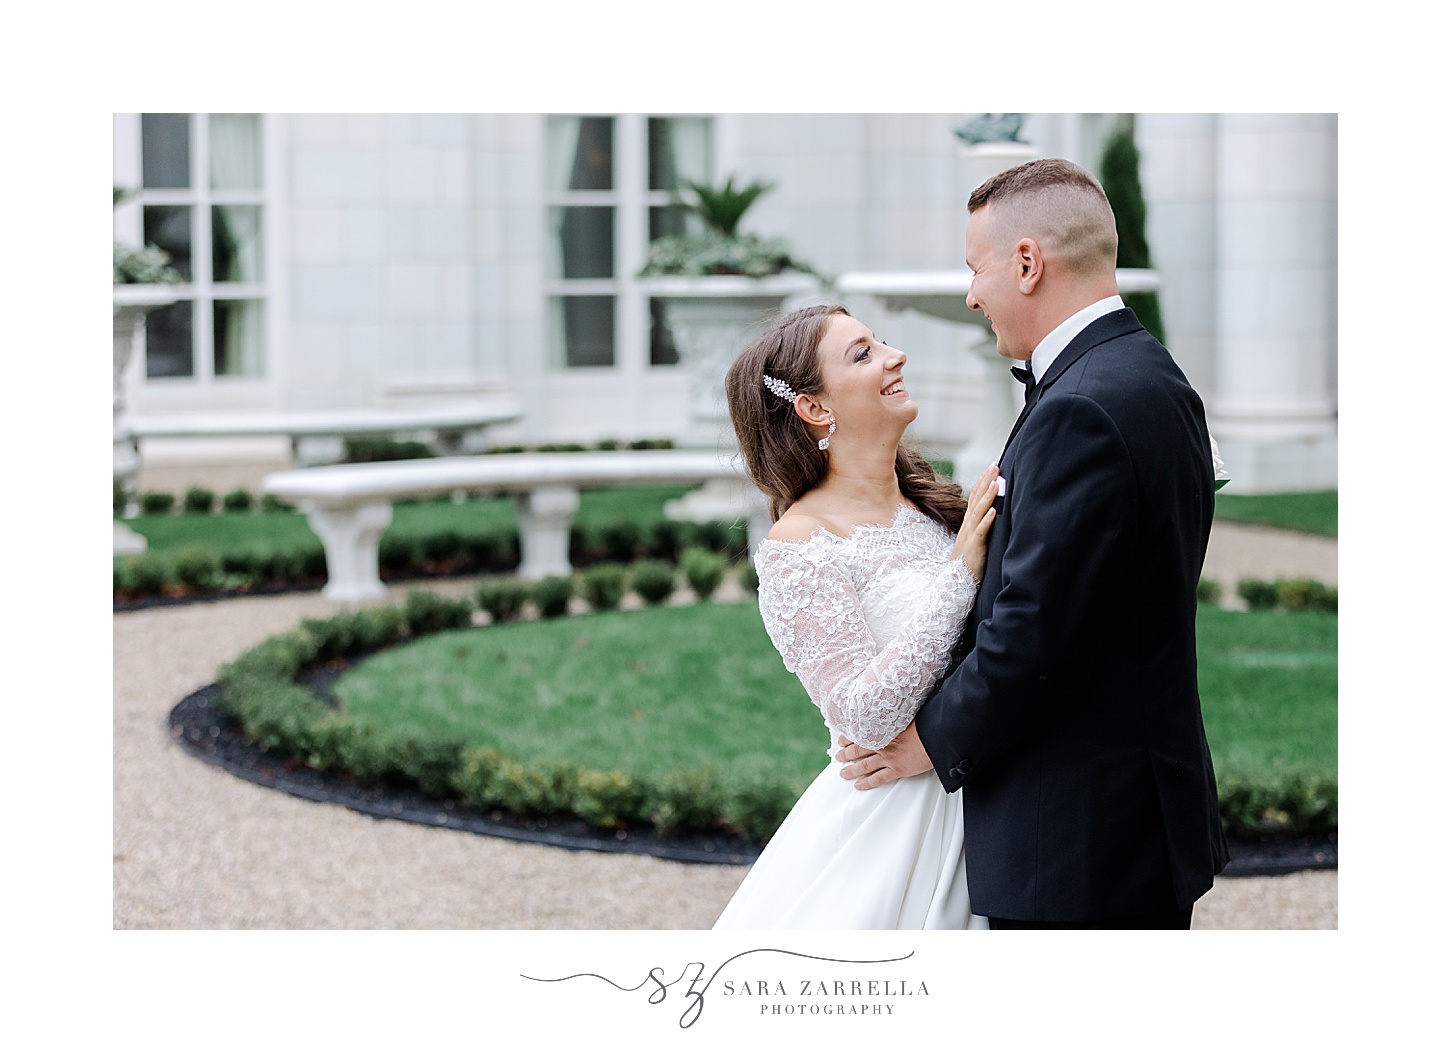 newlyweds pose by greenery in garden at Rosecliff Mansion